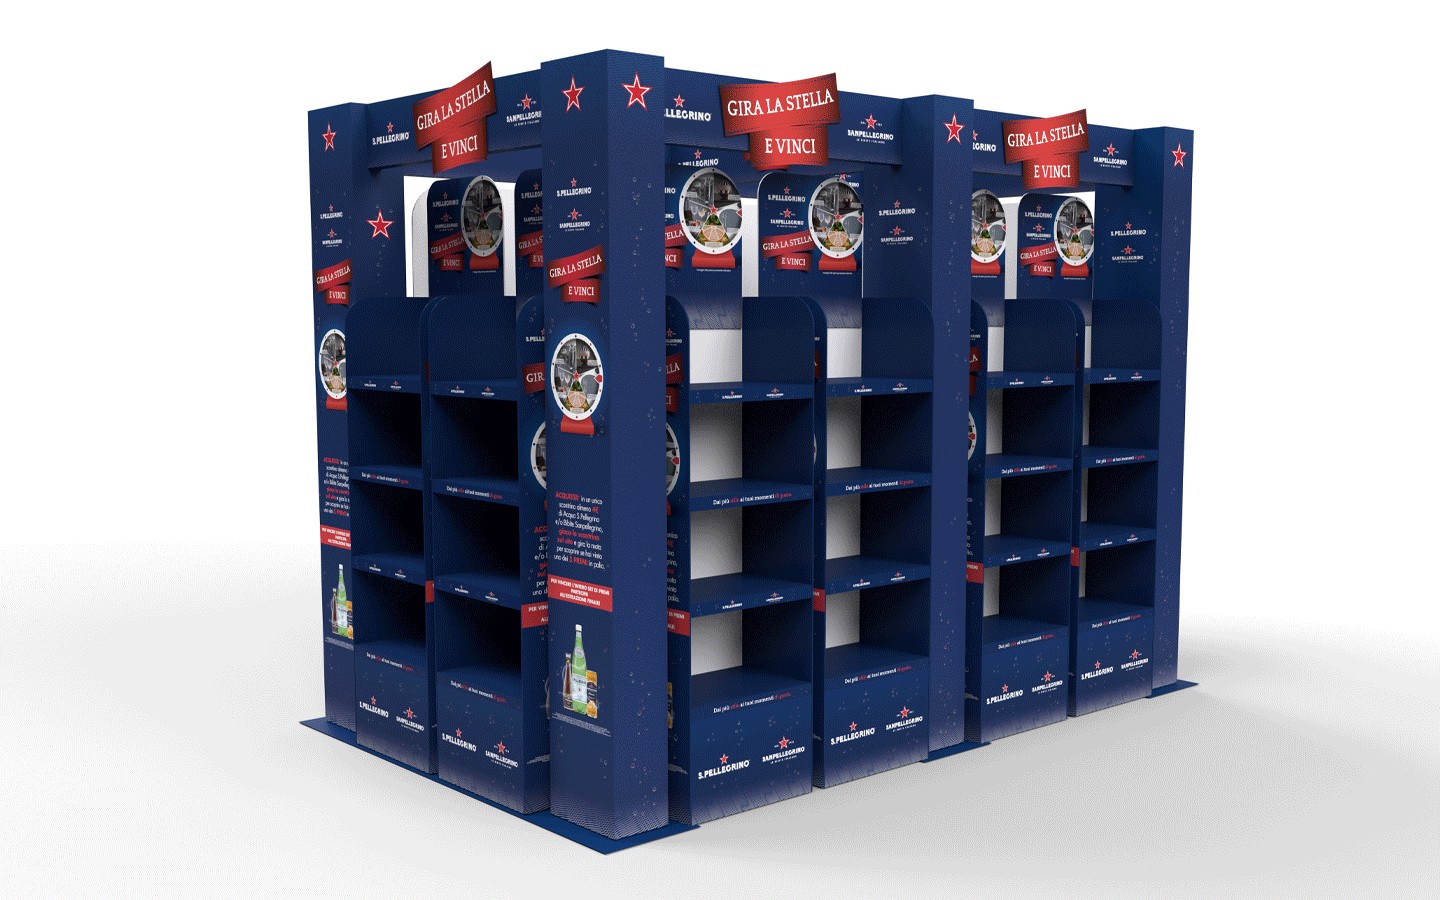 In-store materials for Sanpellegrino promo - Spin the star and win